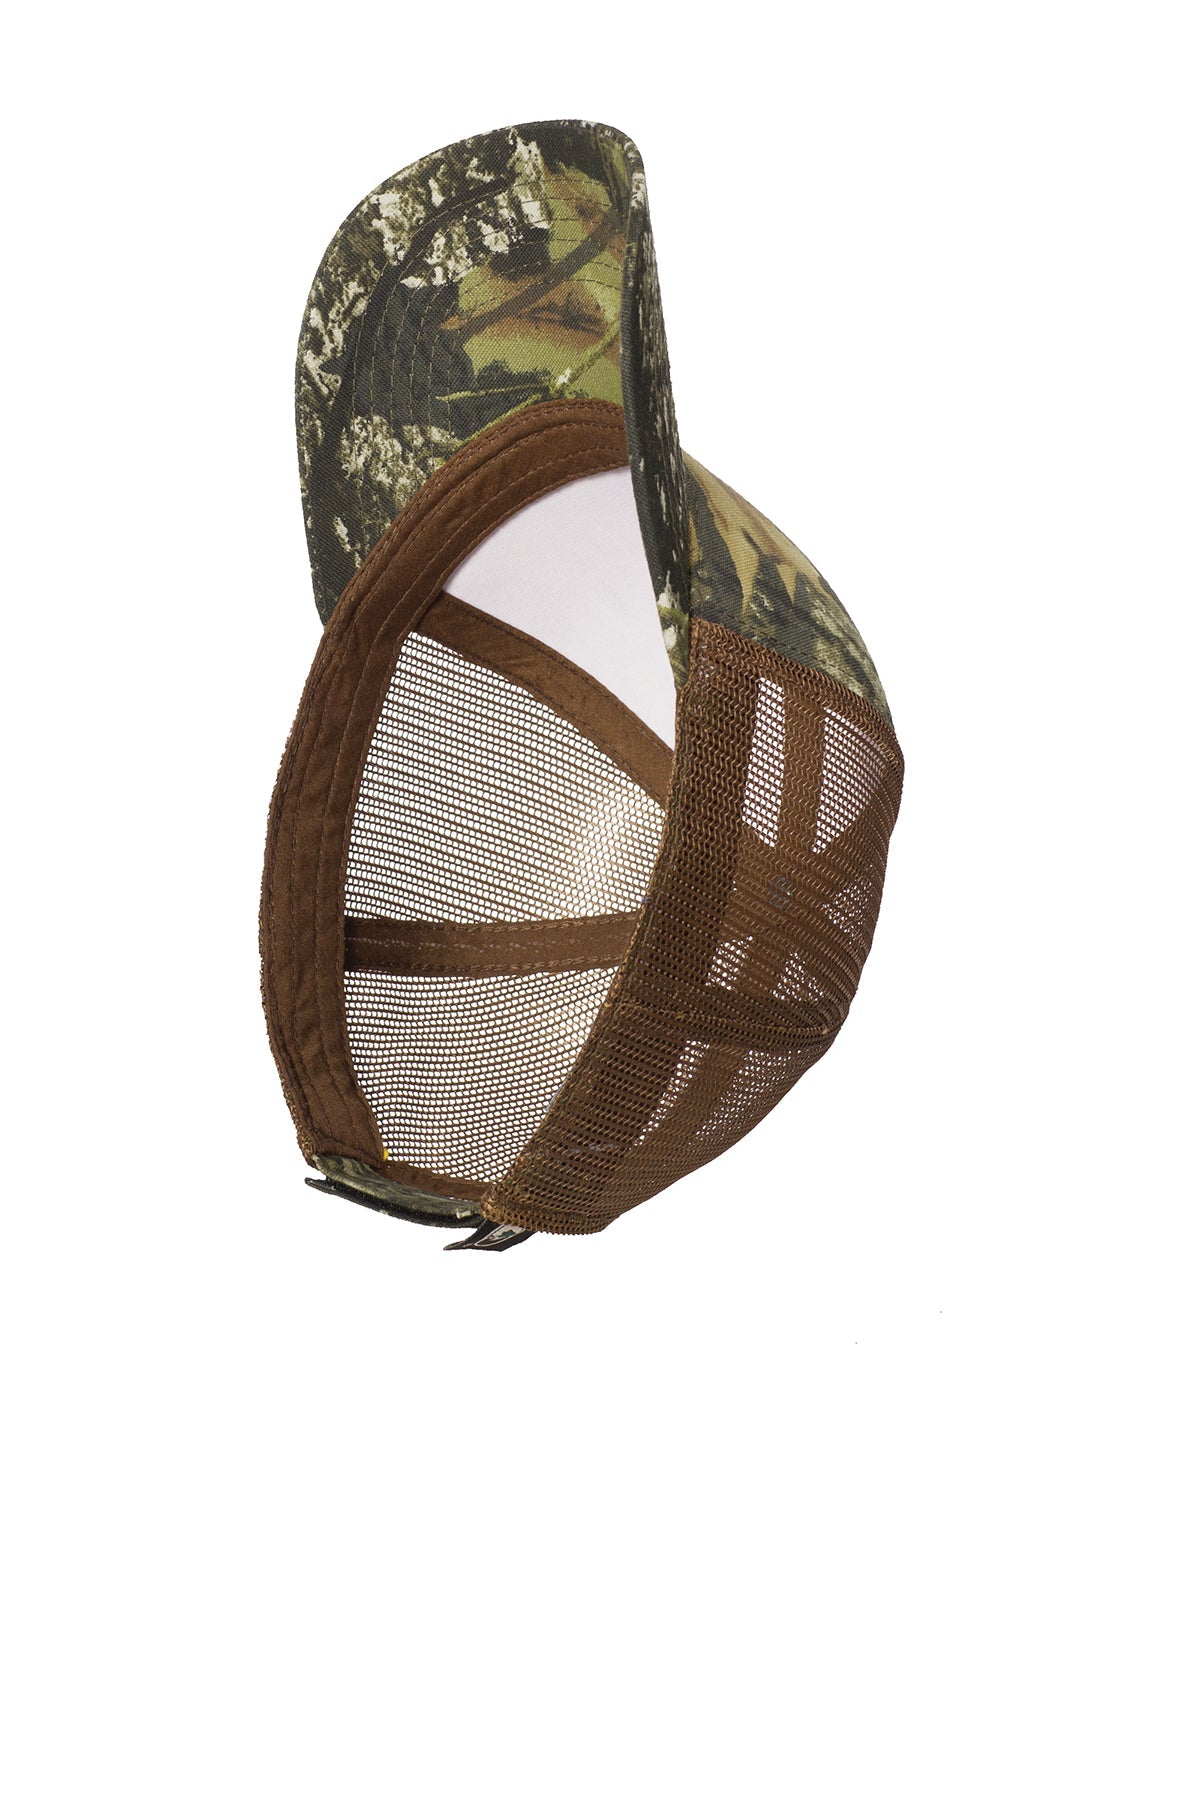 Port Authority Structured Camouflage Mesh Back Branded Caps, Mossy Oak New Break Up/ Brown